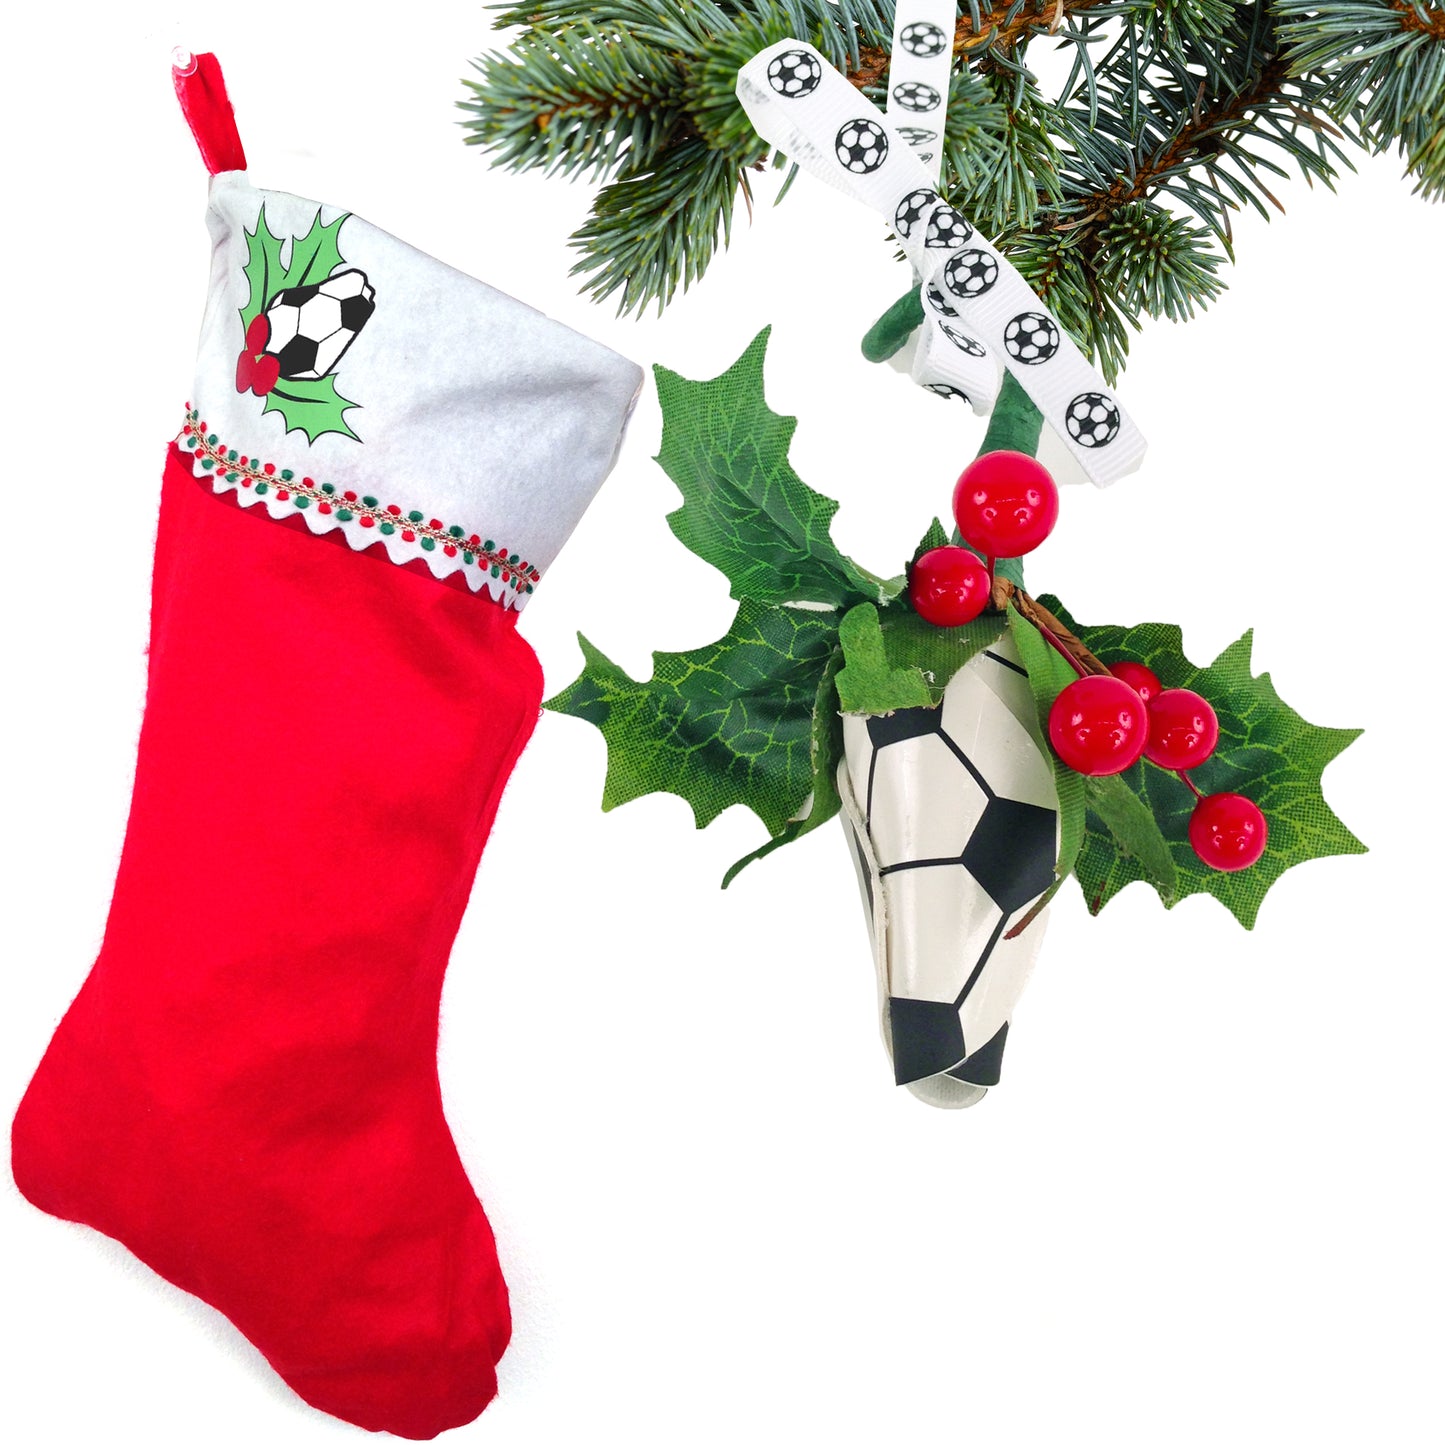 Soccer Rose Christmas Ornament and Stocking Gift Set